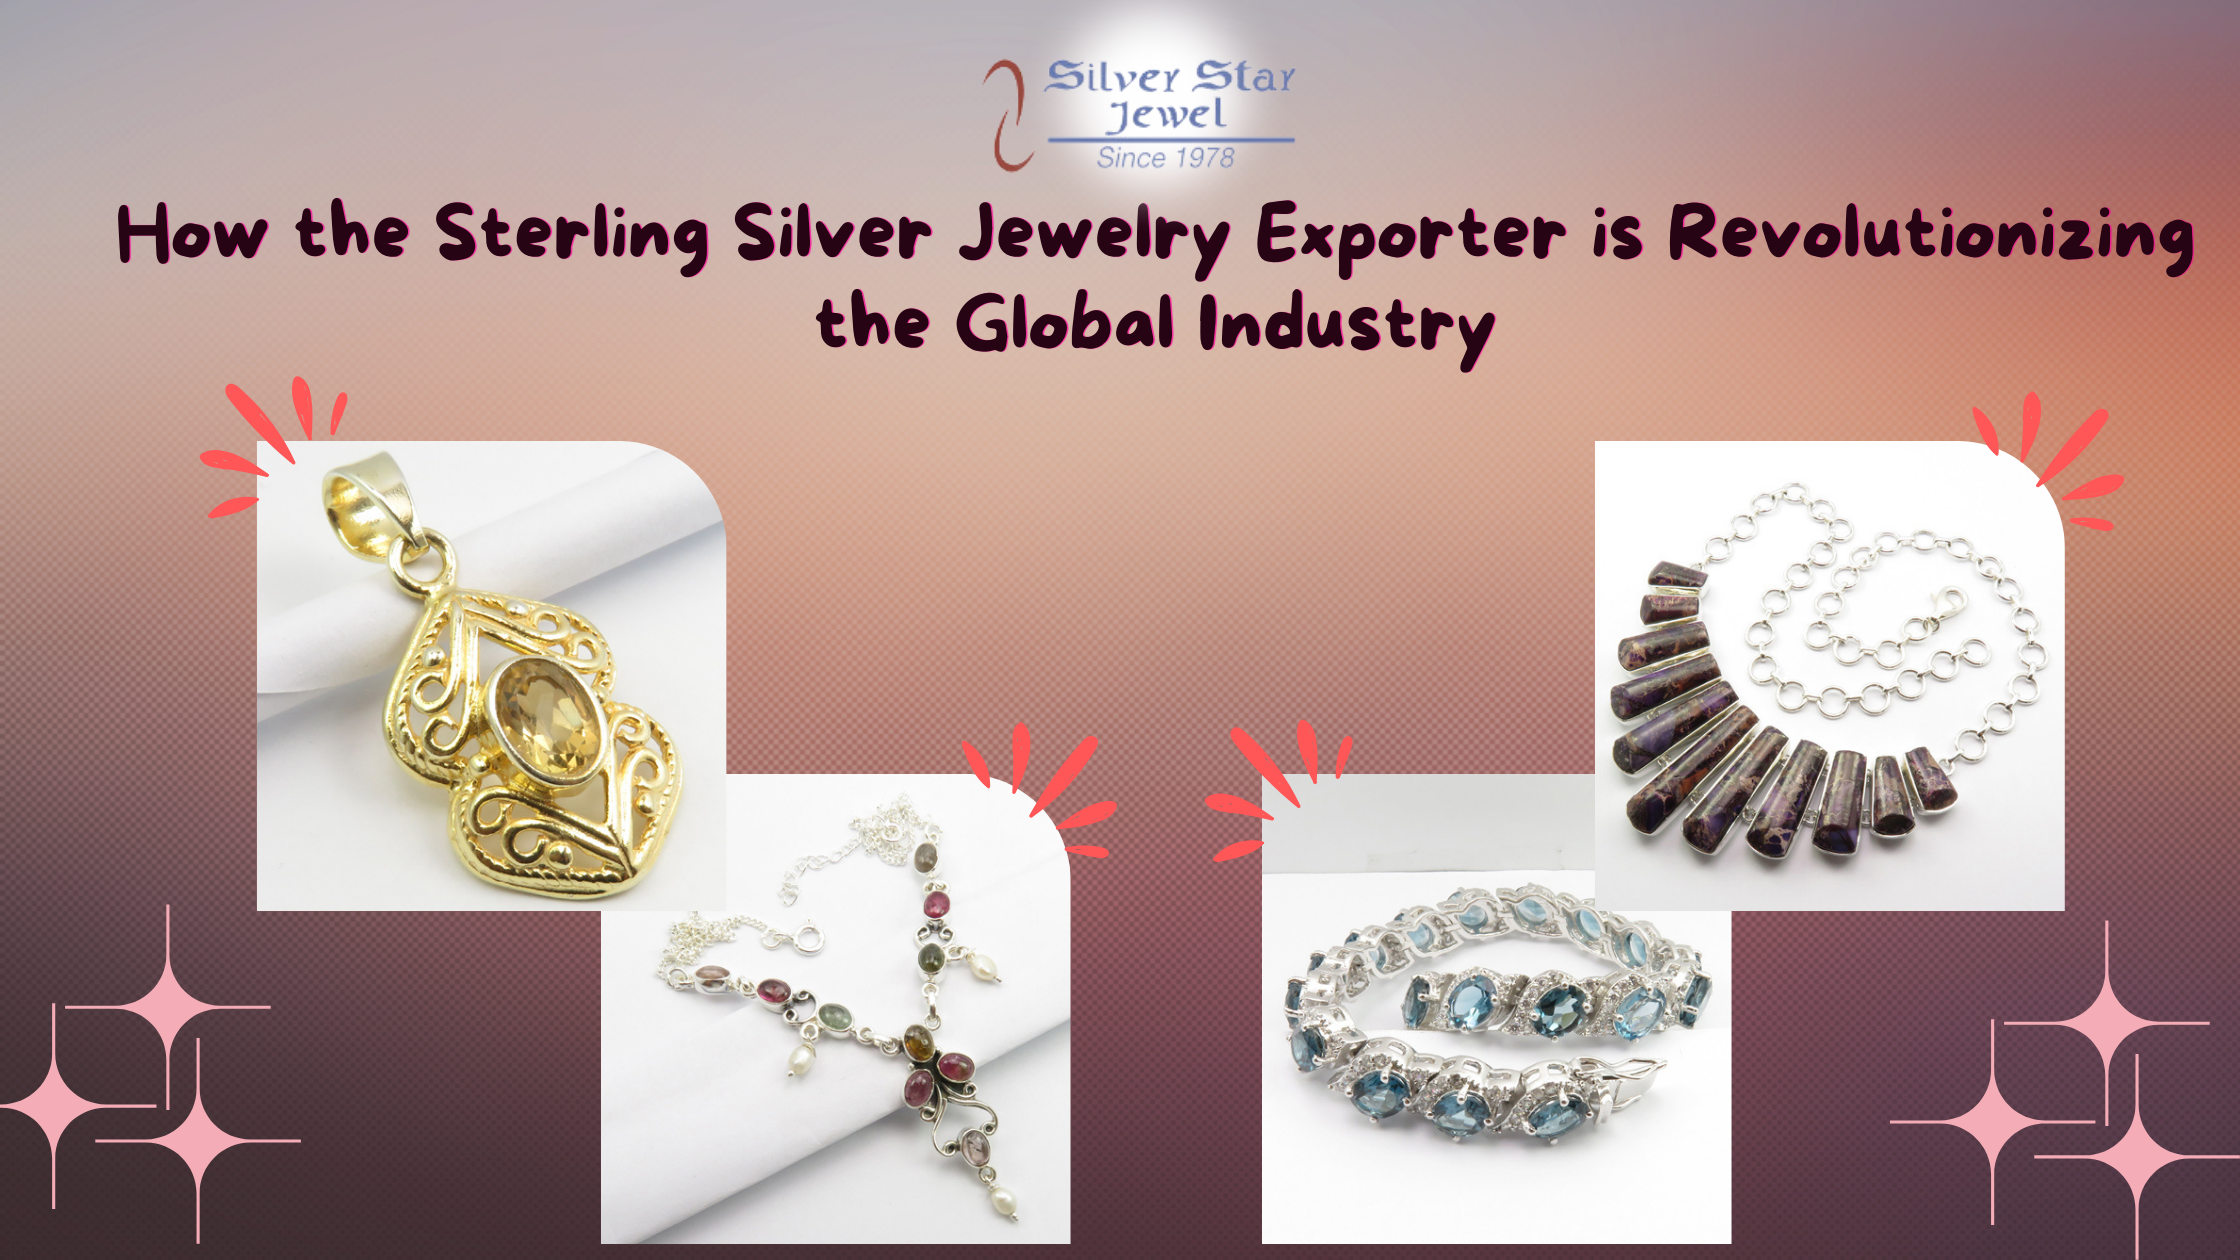 How the Sterling Silver Jewelry Exporter is Revolutionizing the Global Industry